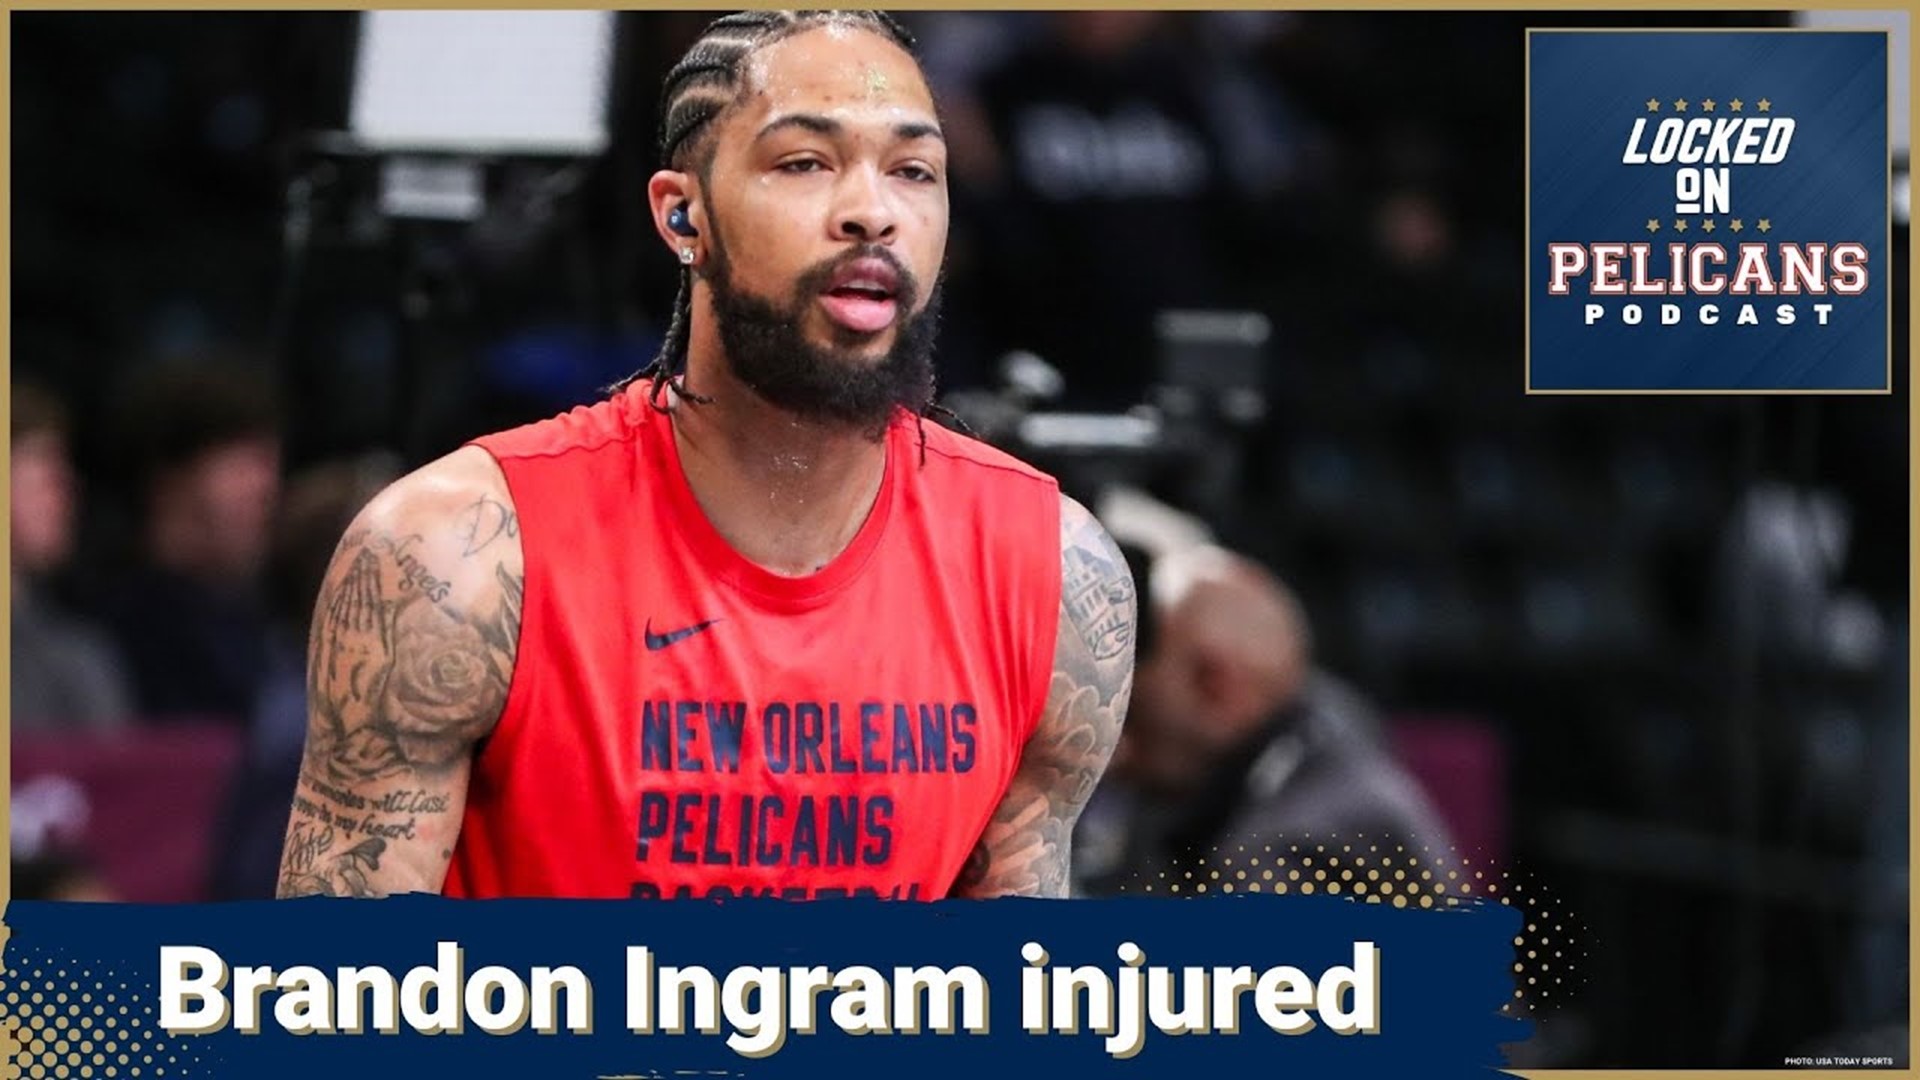 Brandon Ingram left the game for the New Orleans Pelicans after suffering a left knee injury. Jake Madison looks at what that could mean for the Pels going forward